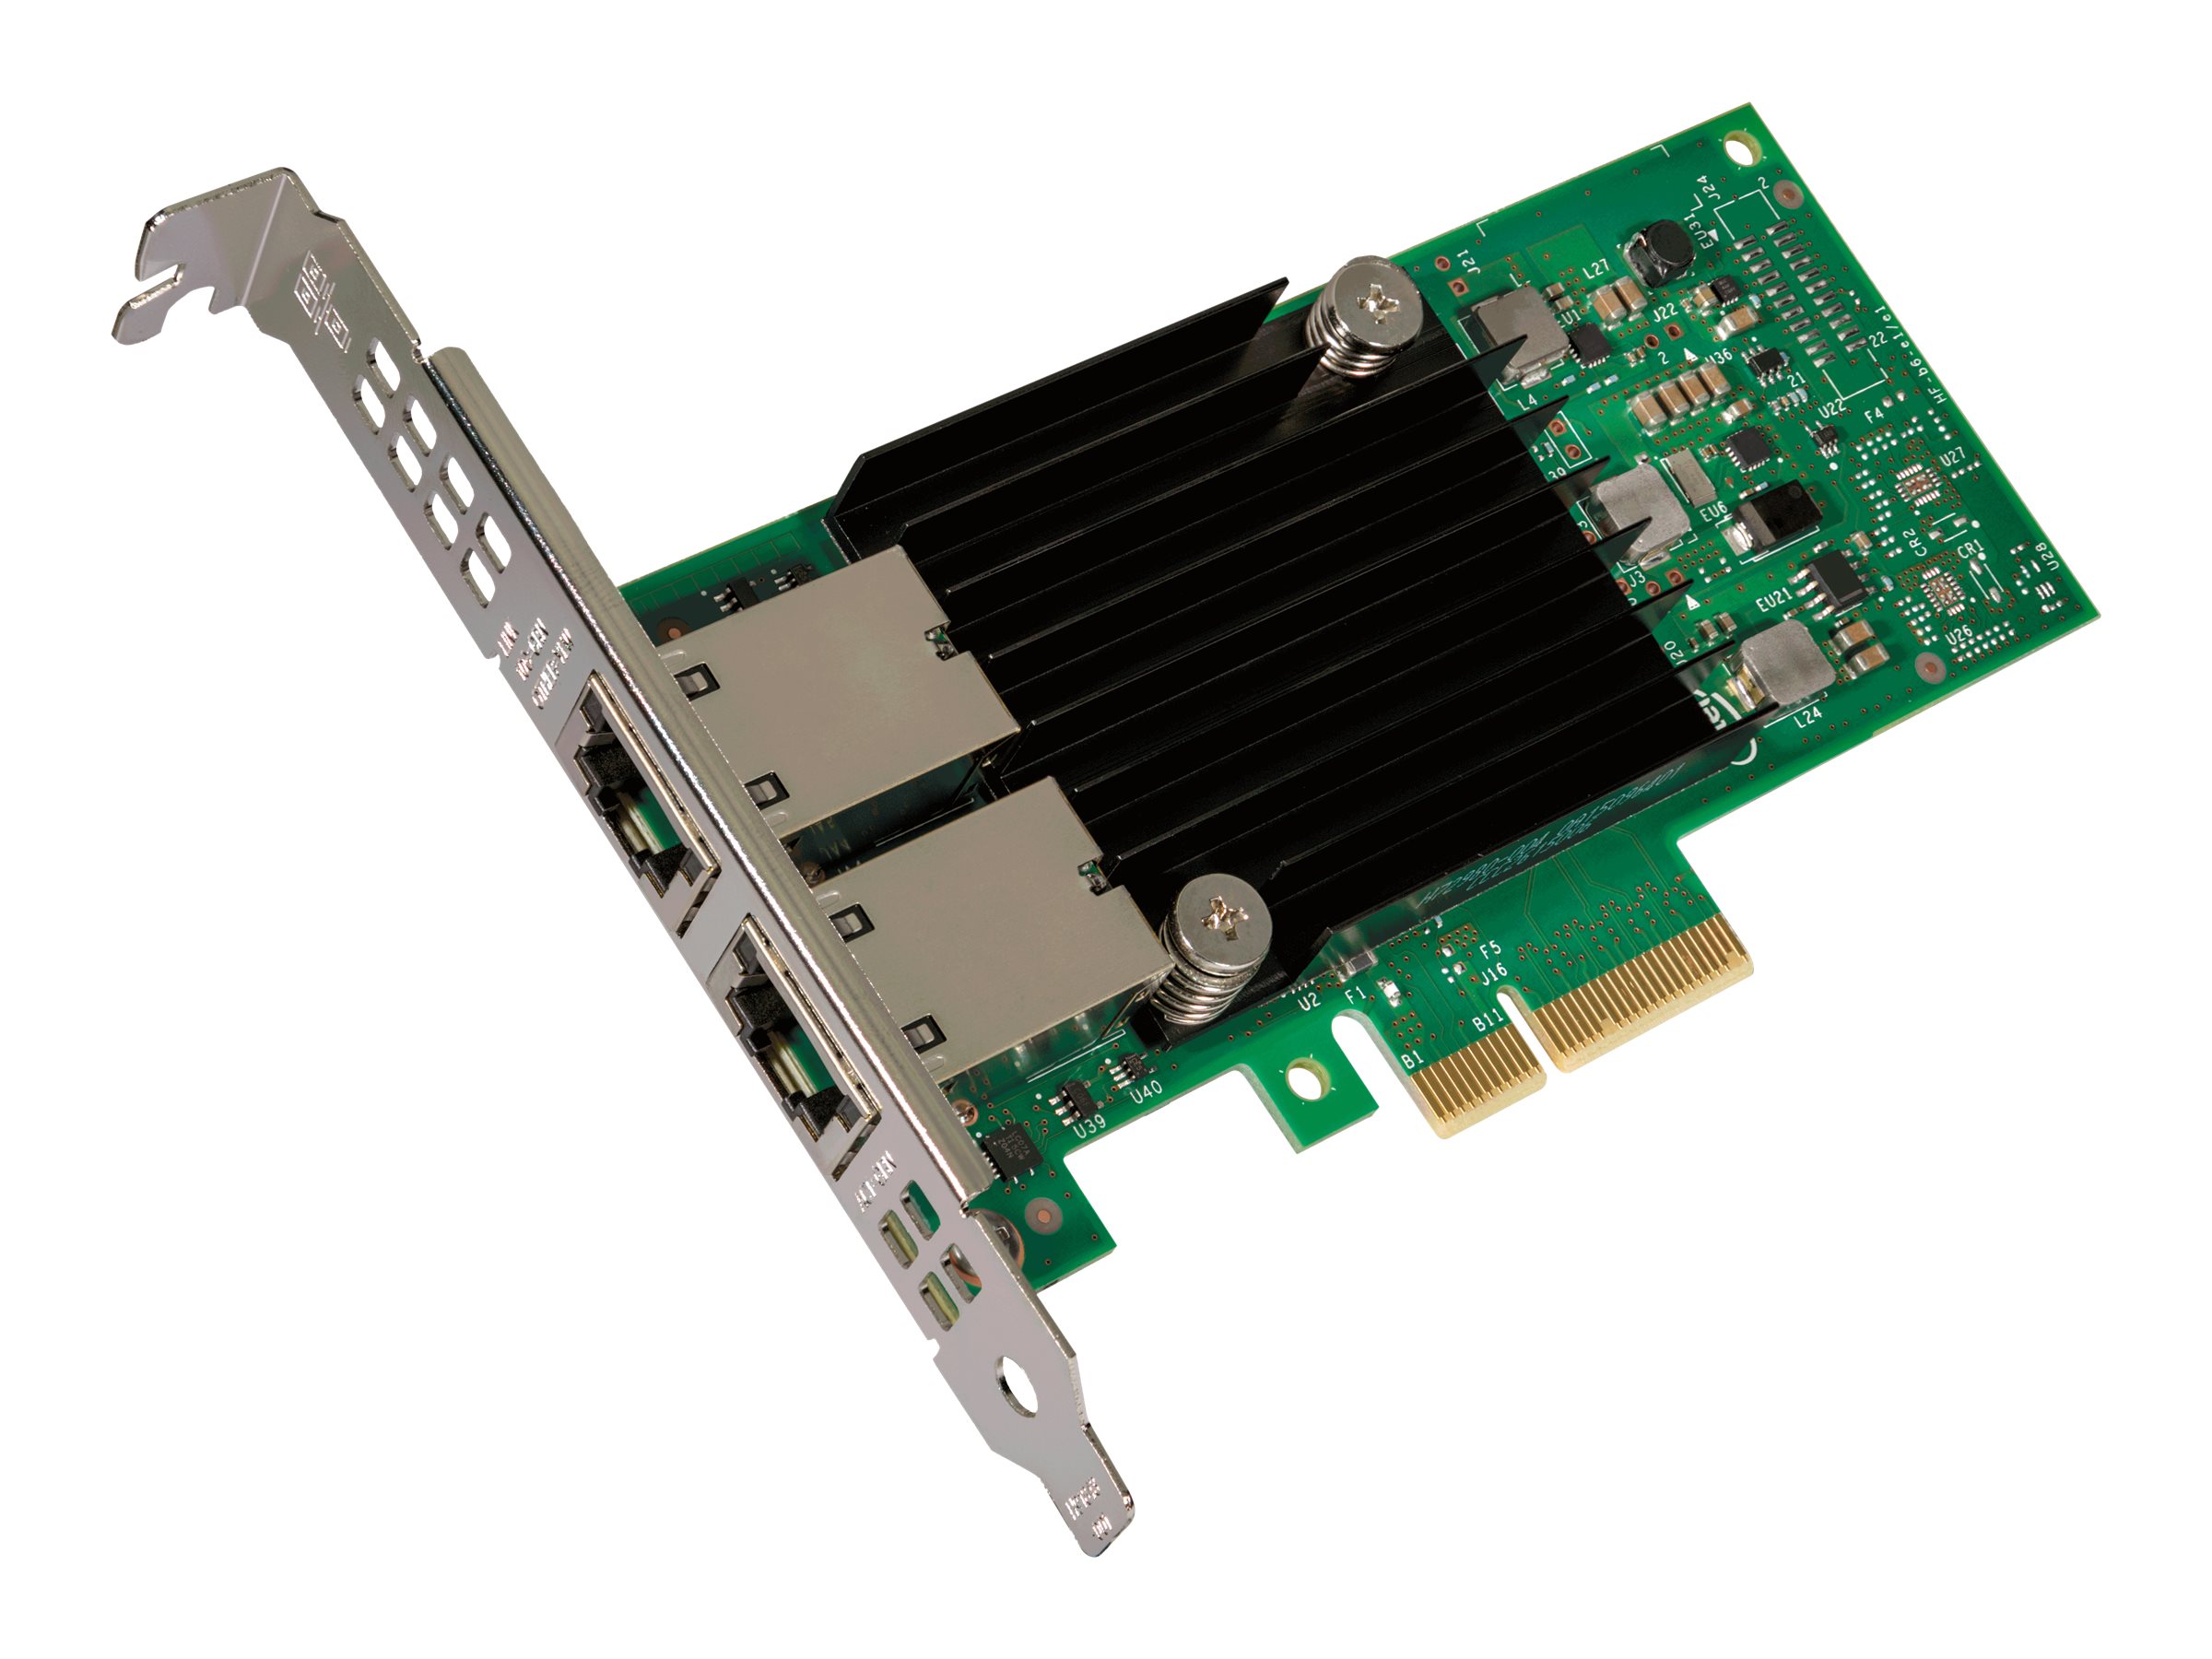 Intel Ethernet Converged Network Adapter X550-T2